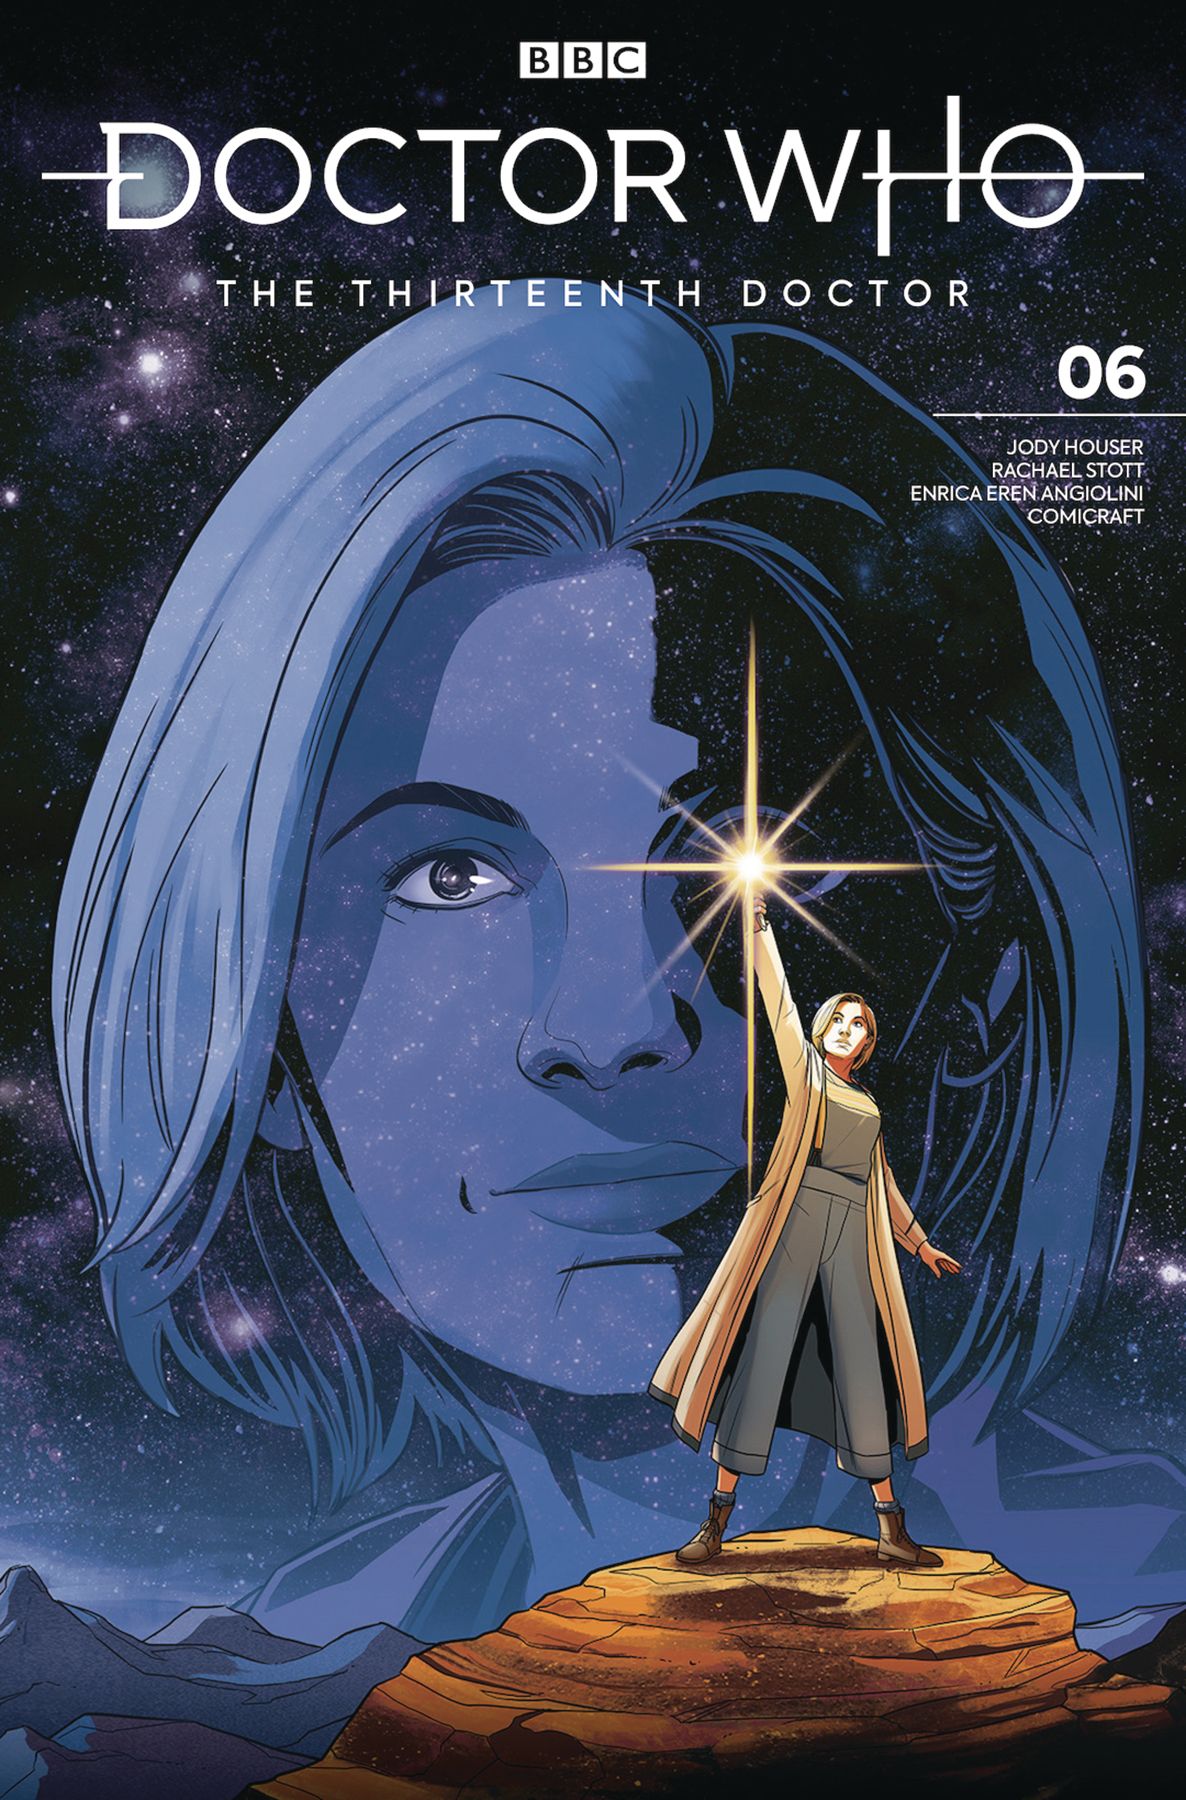 Doctor Who: The Thirteenth Doctor #6 Comic